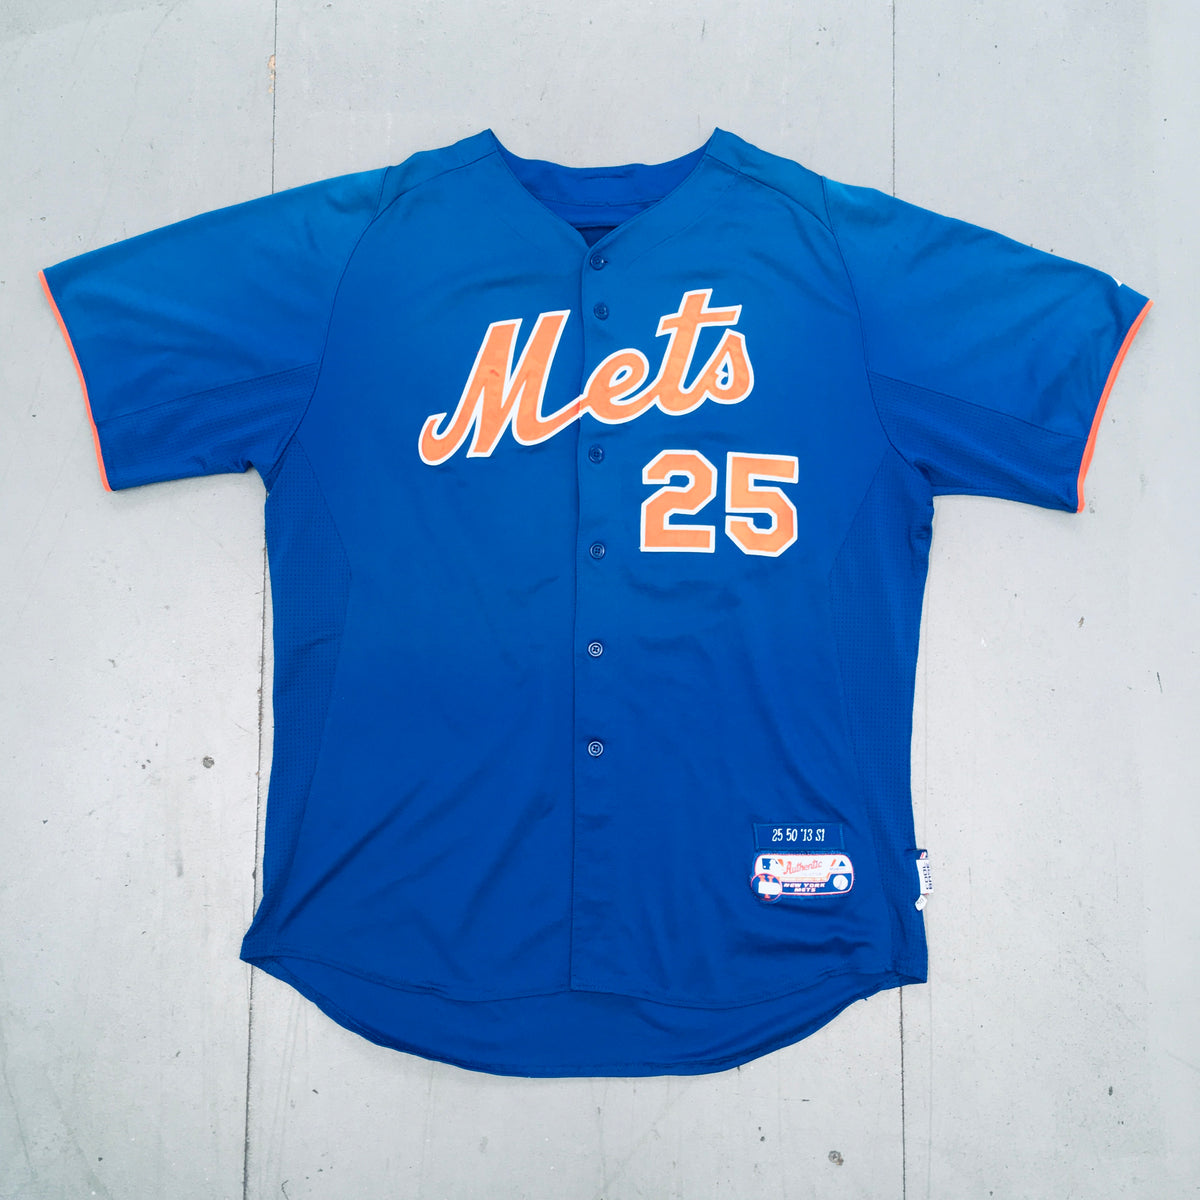 MLB New York Mets 2013 All Star Game baseball jersey by Majestic